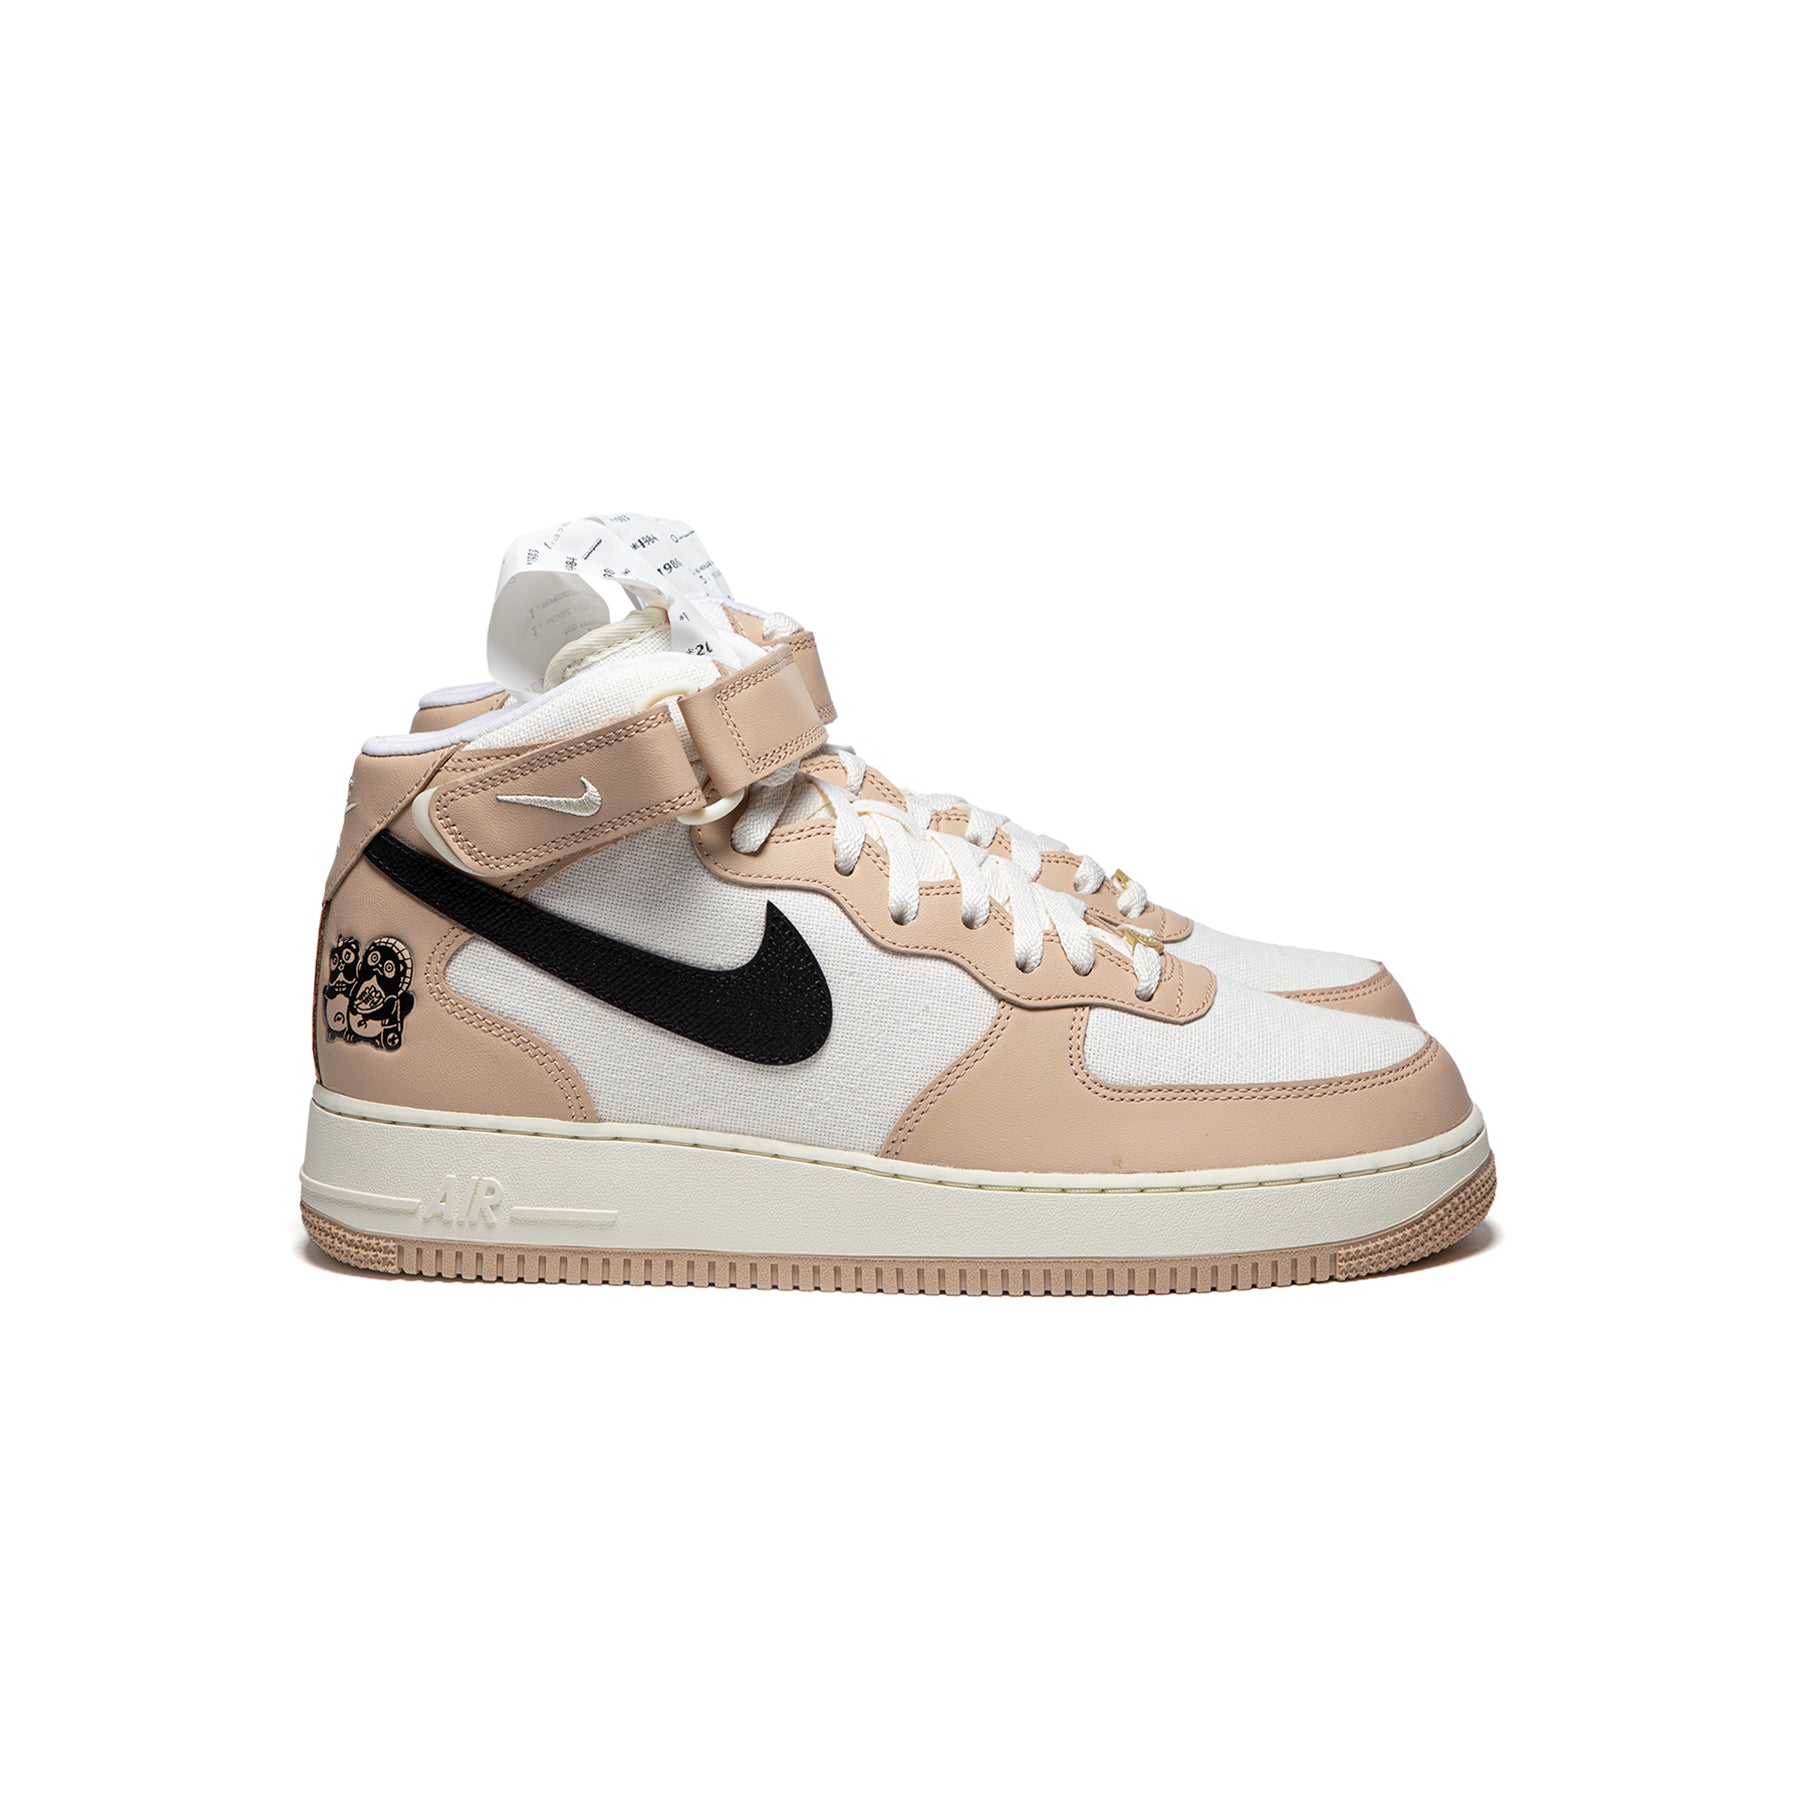 Nike Air Force 1 Mid '07 LX (Shimmer/Black/Ivory/Coco Milk)